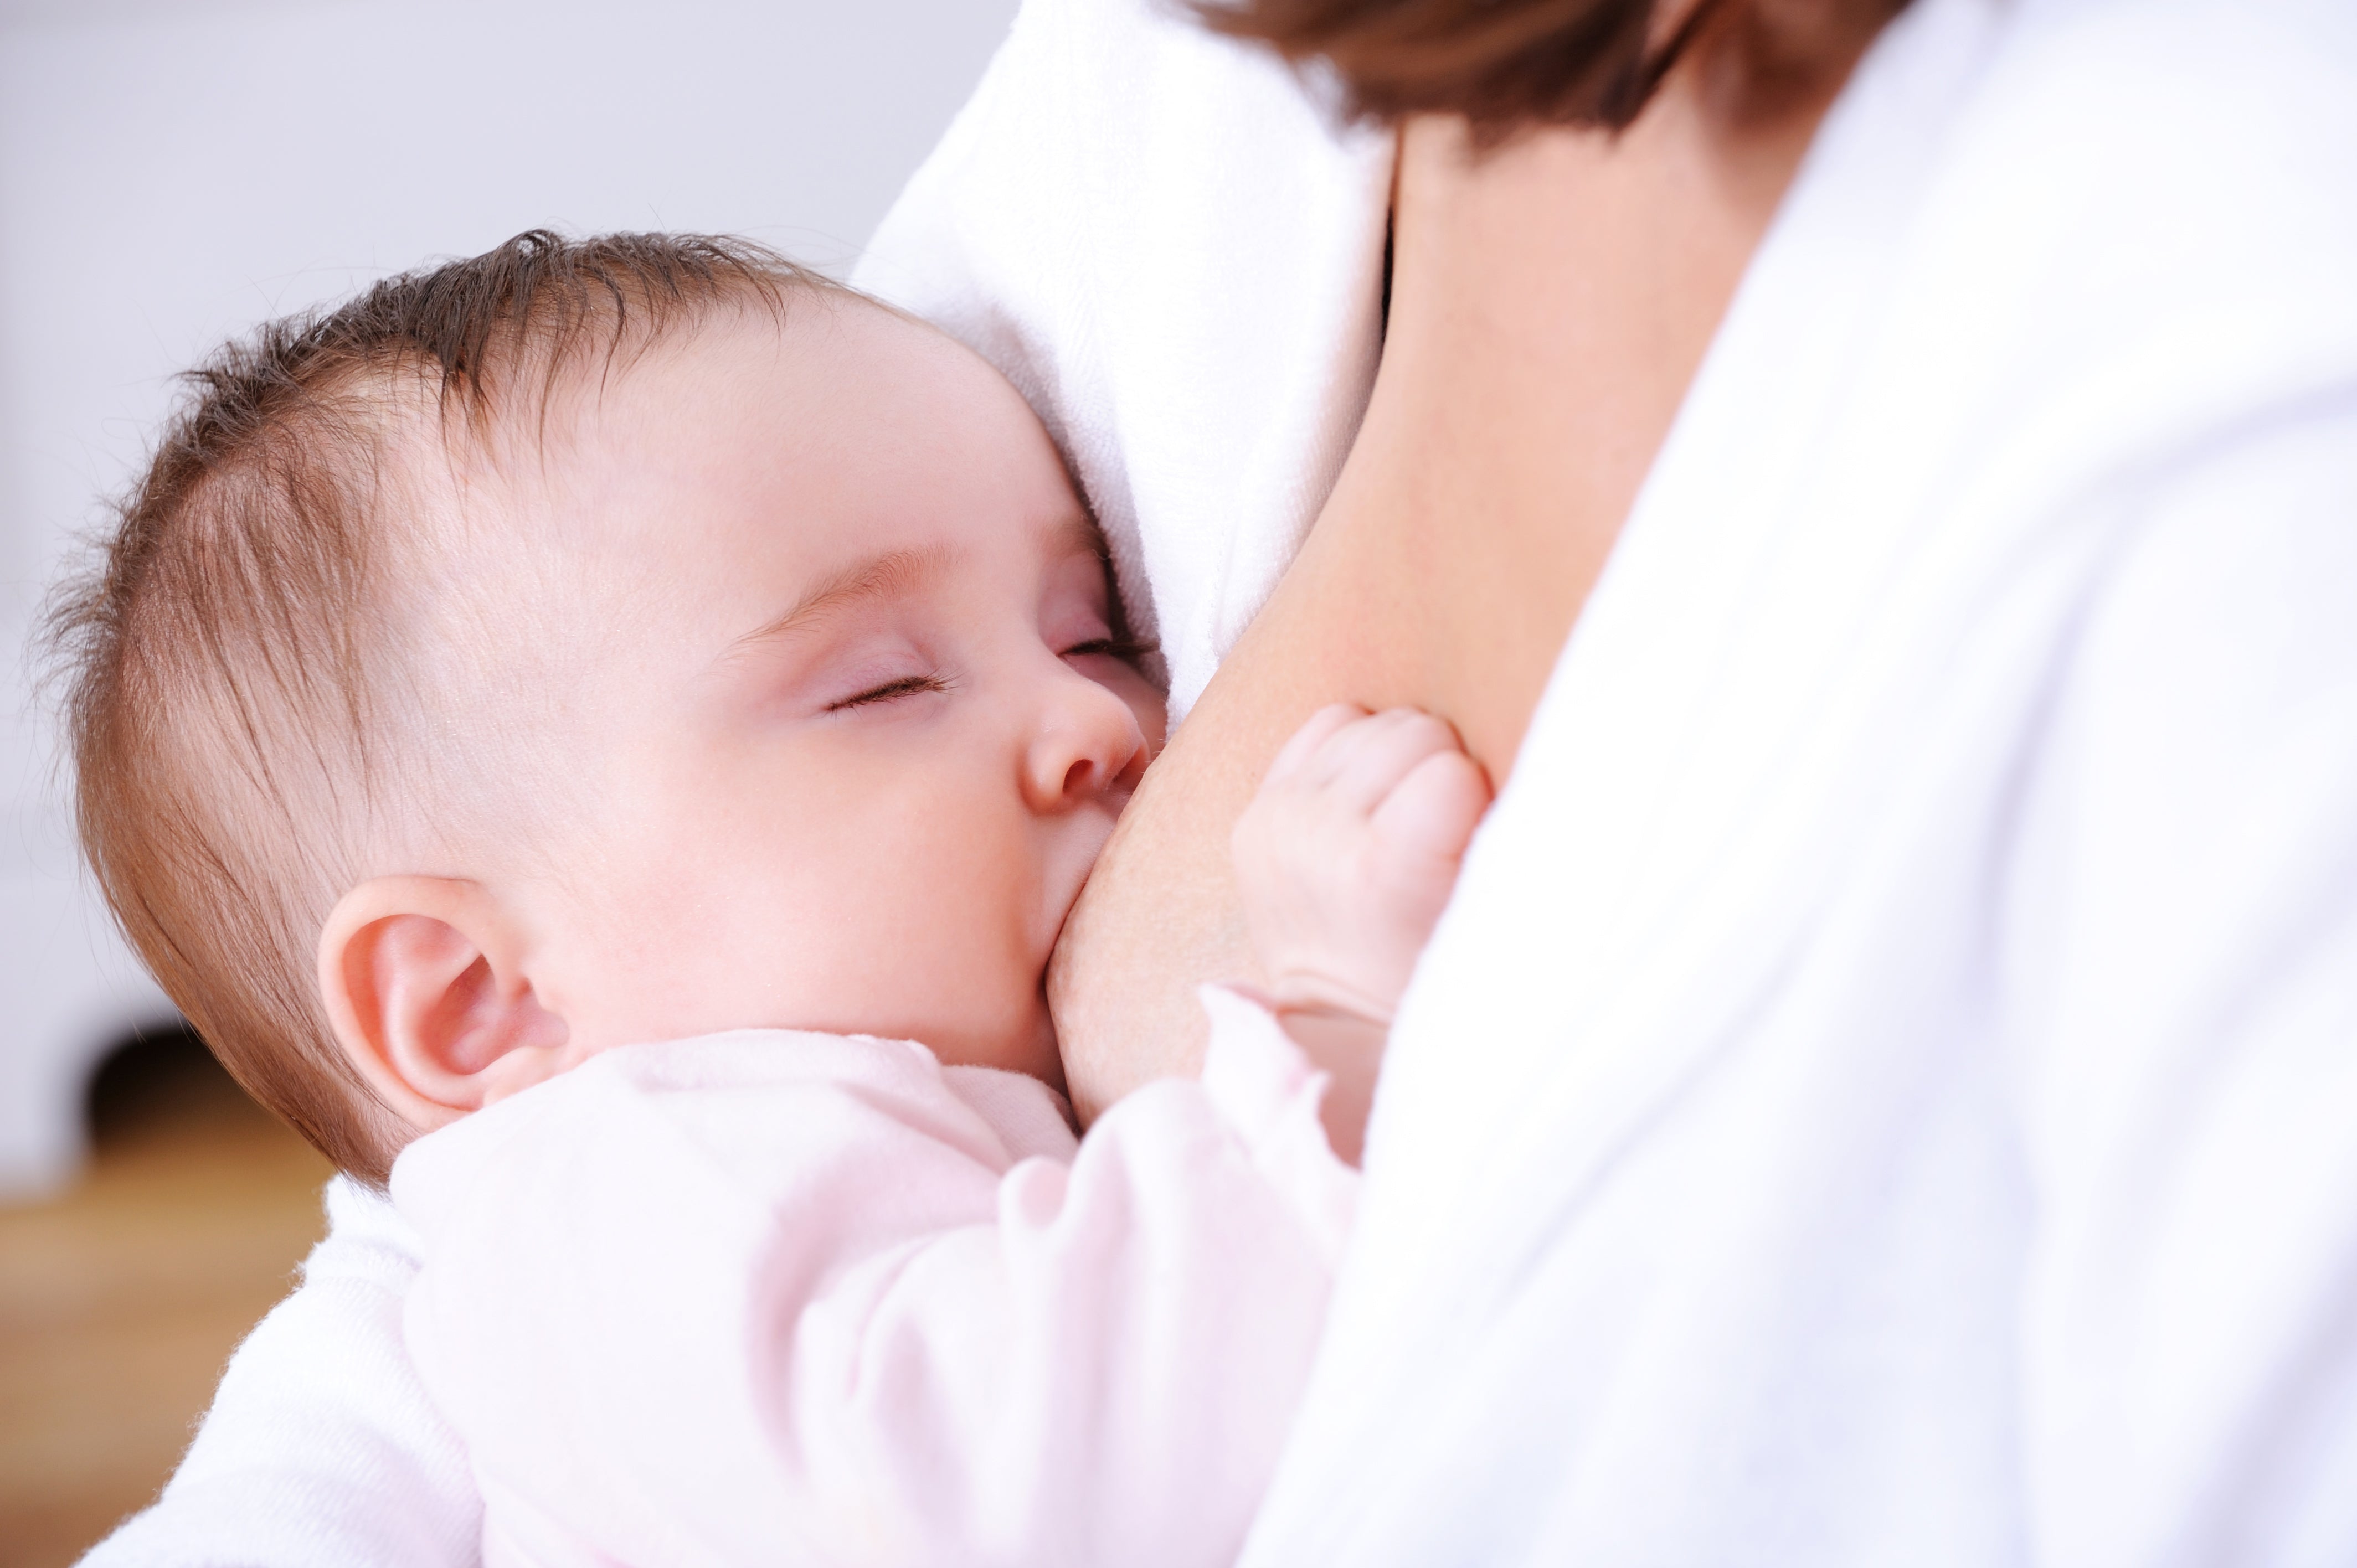 Contraception during breastfeeding